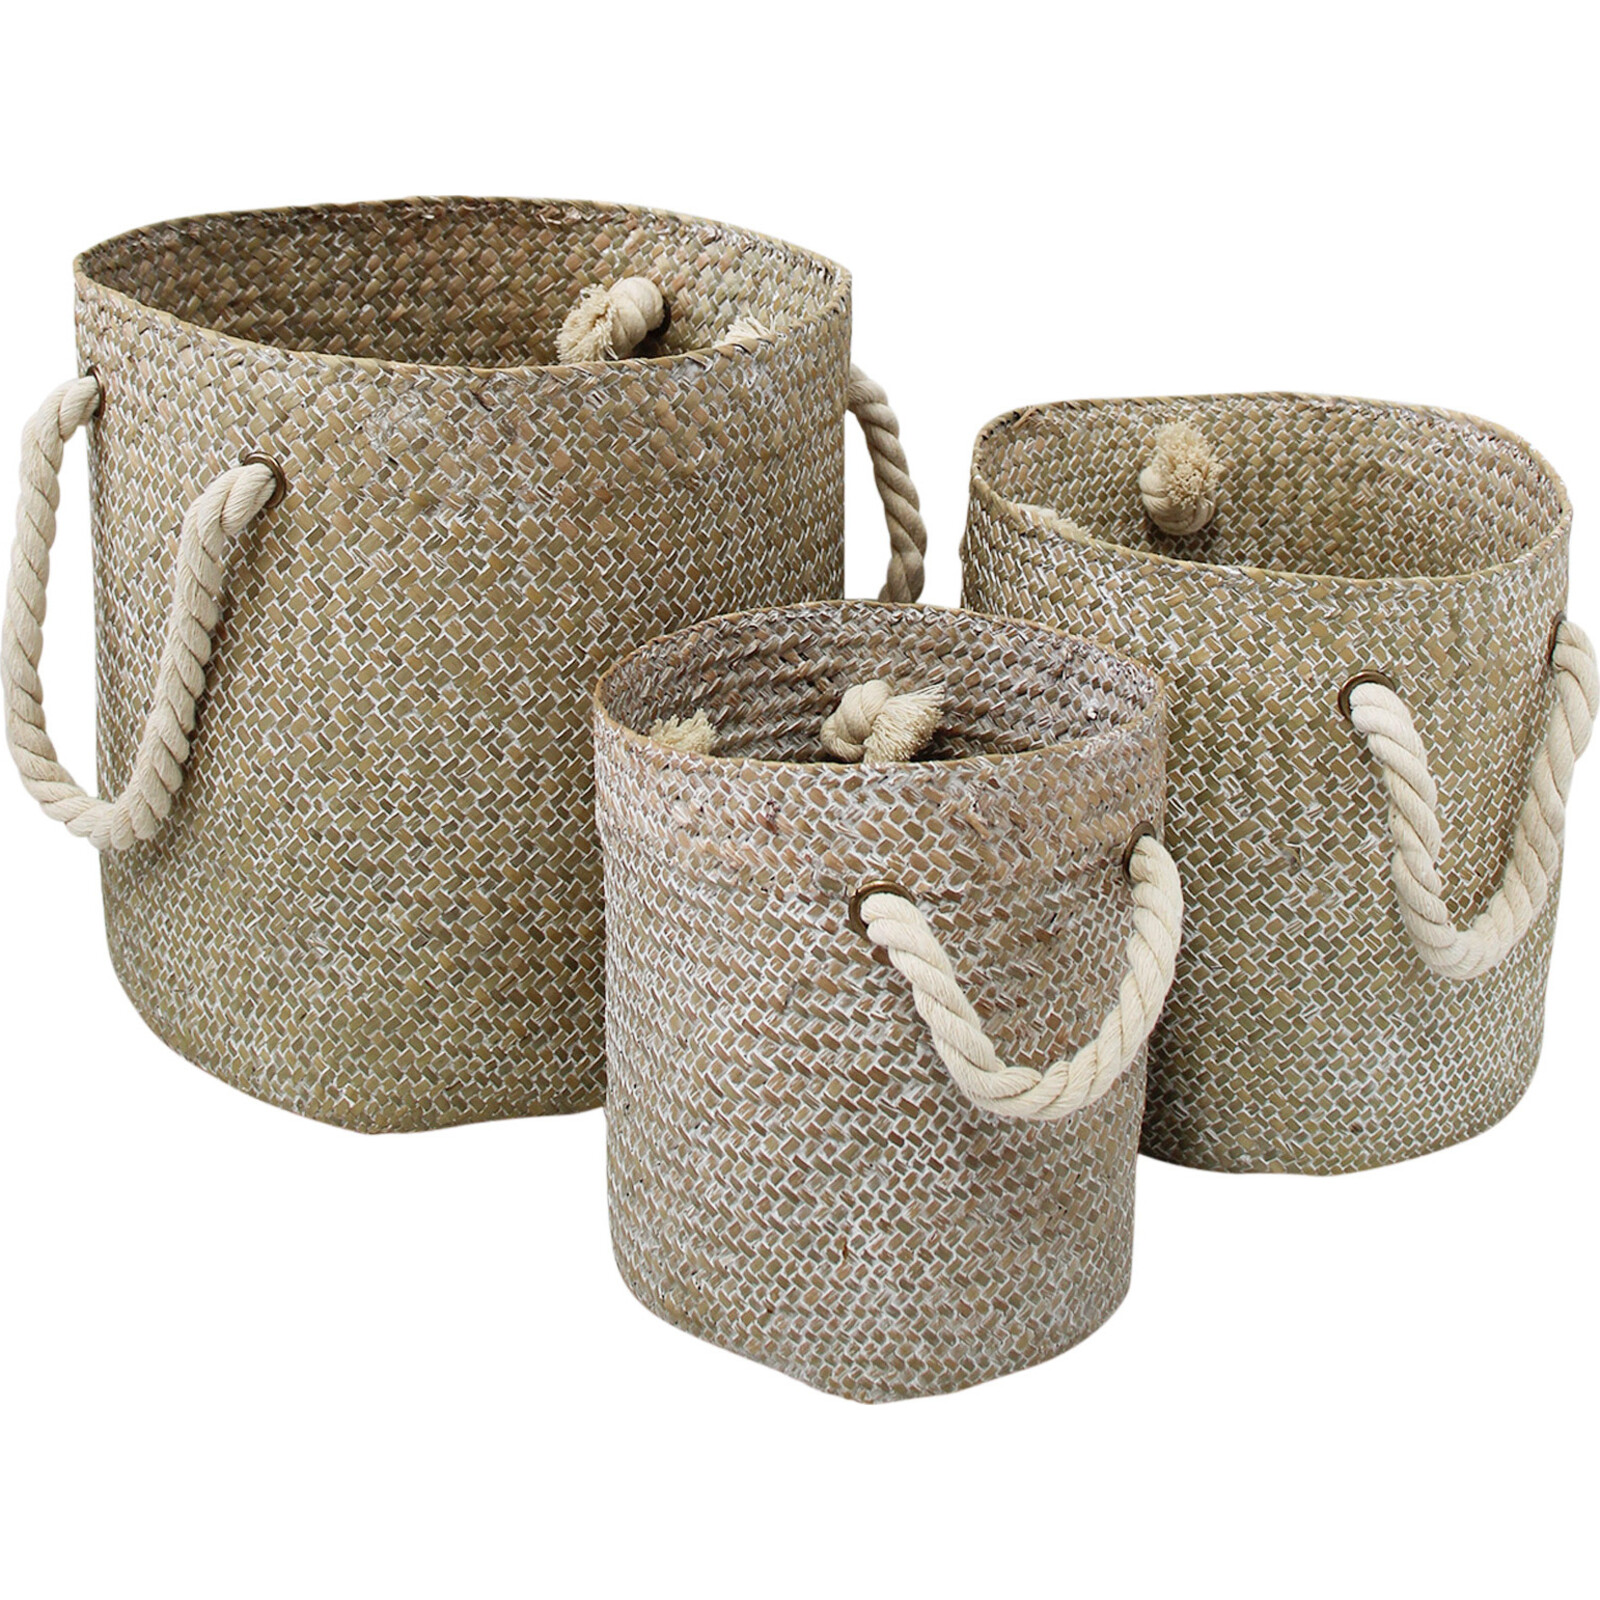 Woven Tubs S/3 Rope HandleWashed